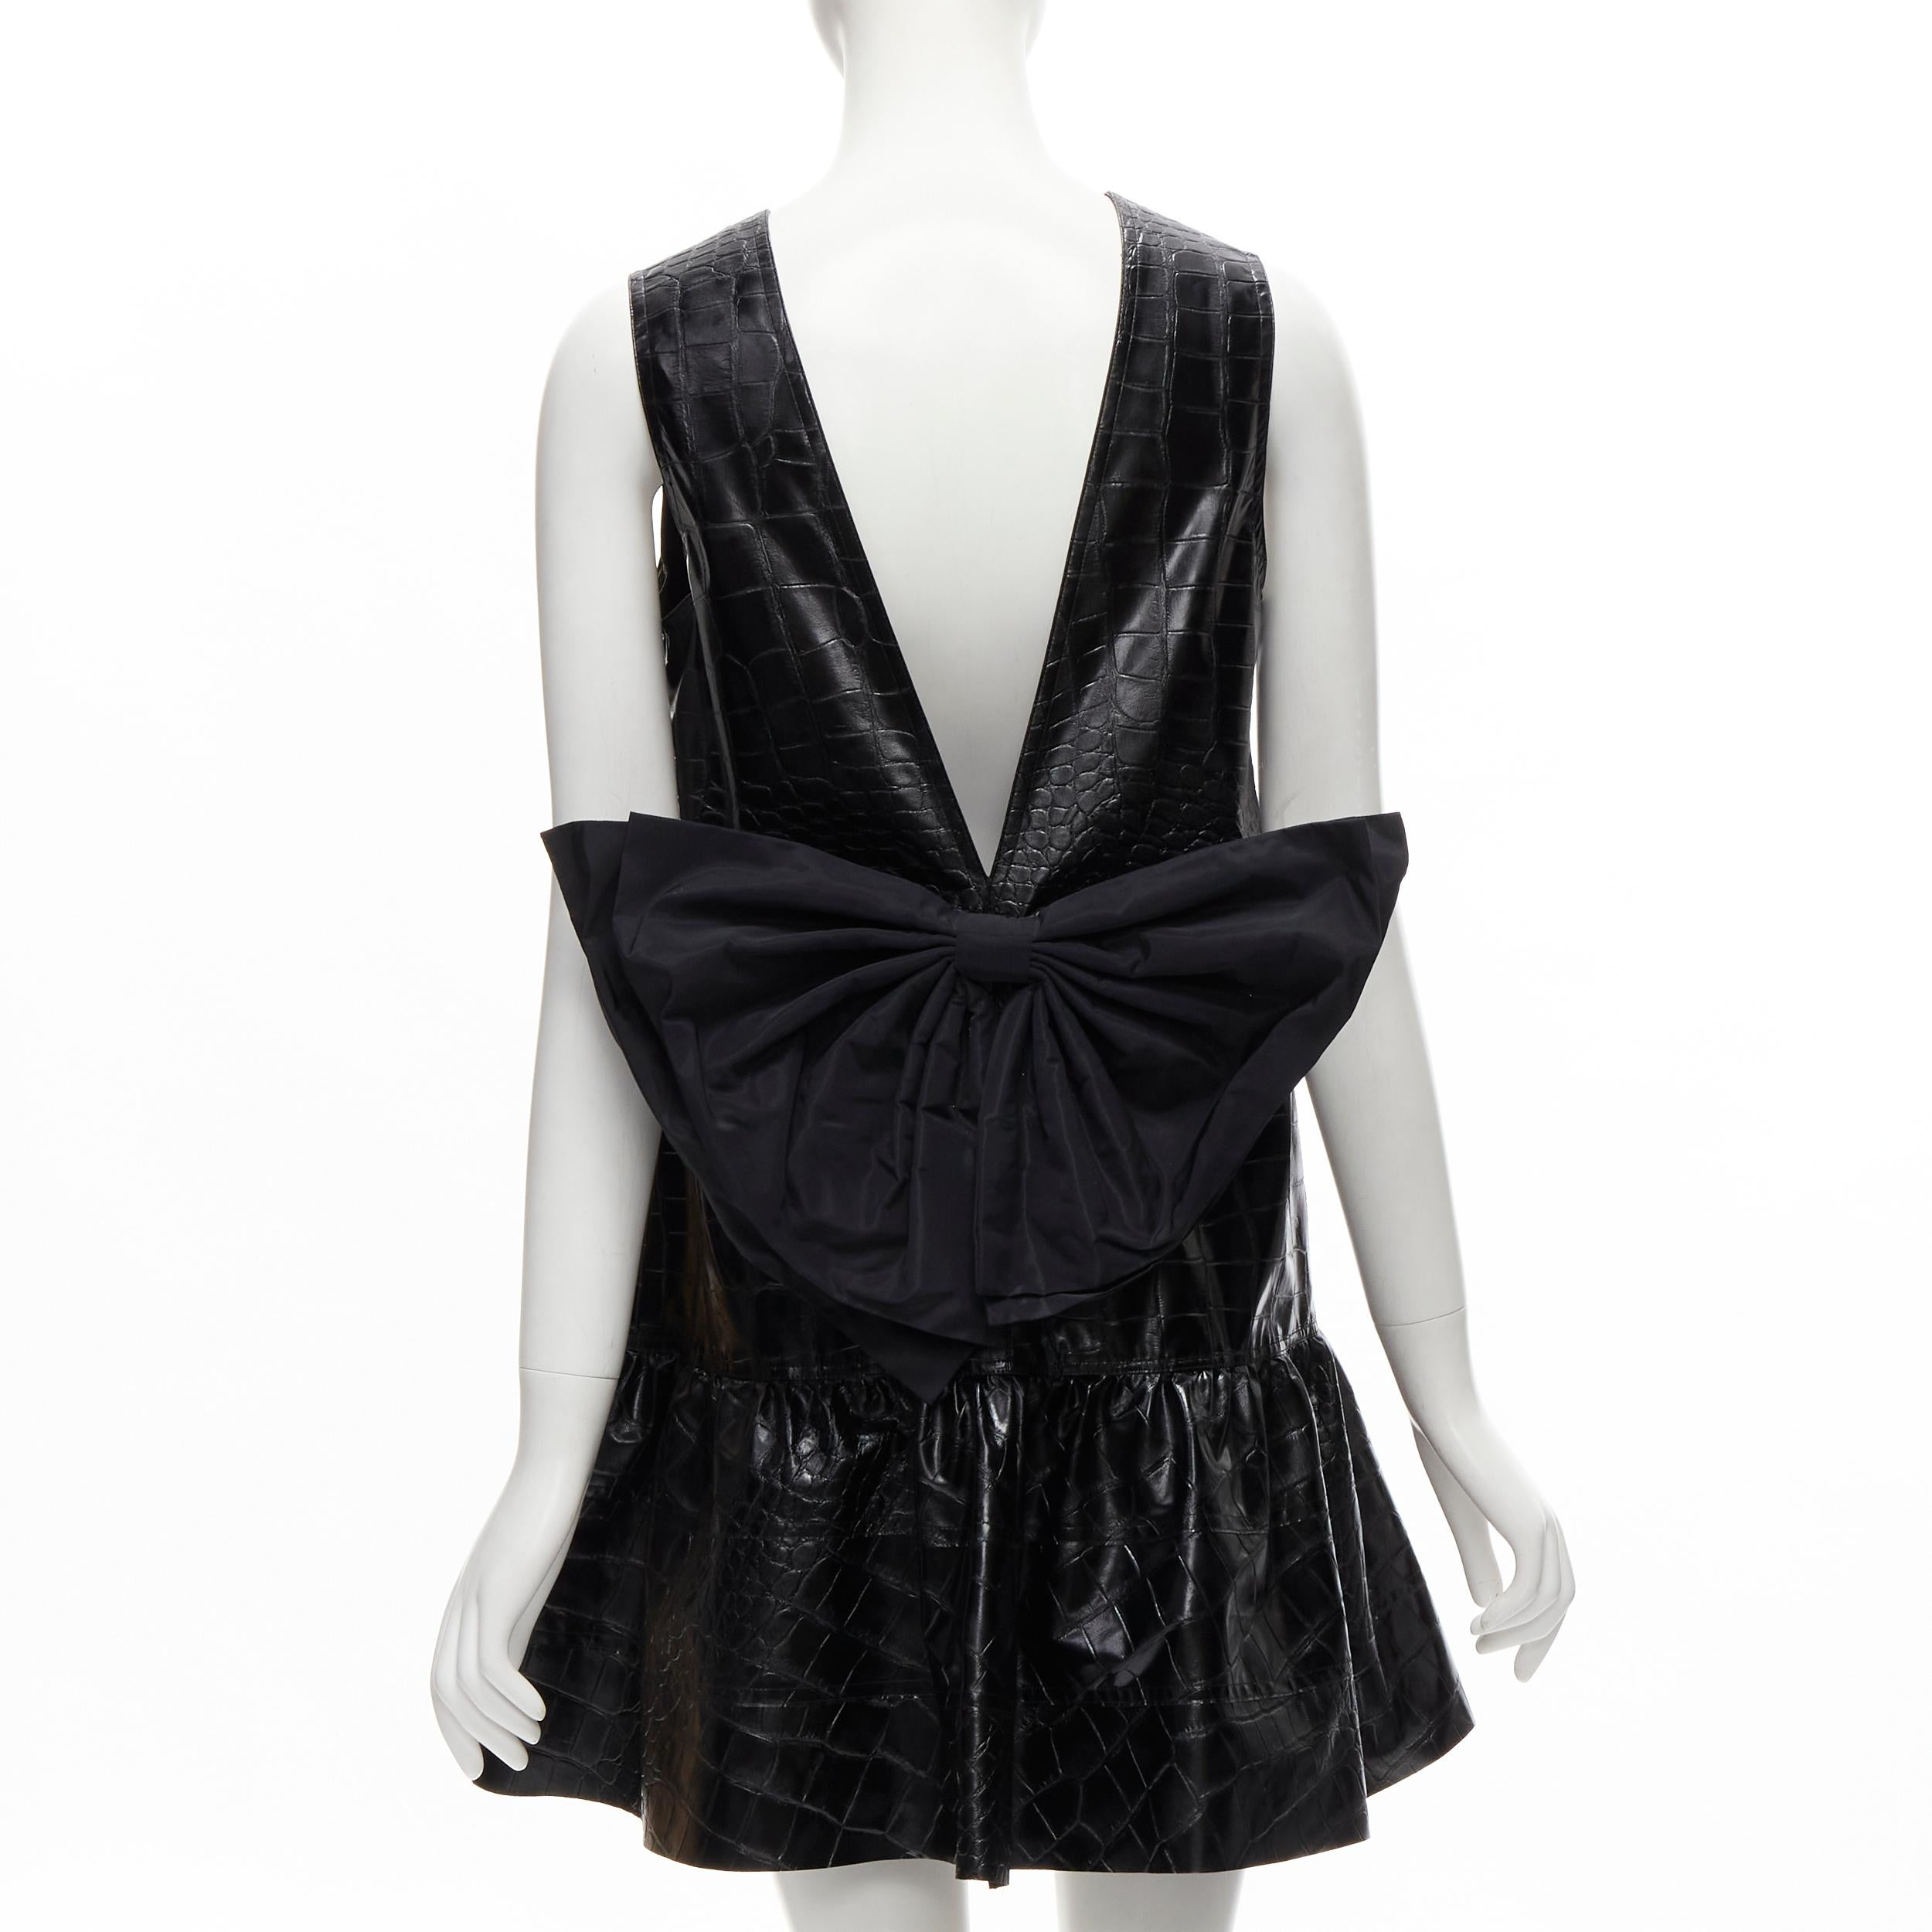 BROGNANO stamped croc faux leather bow back flared dress IT38 XS
Brand: Brognano
Material: Polyester
Color: Black
Pattern: Solid
Extra Detail: Mock croc stamped pattern on faux leather. Ruffle flared skirt. Plunging back with tafetta